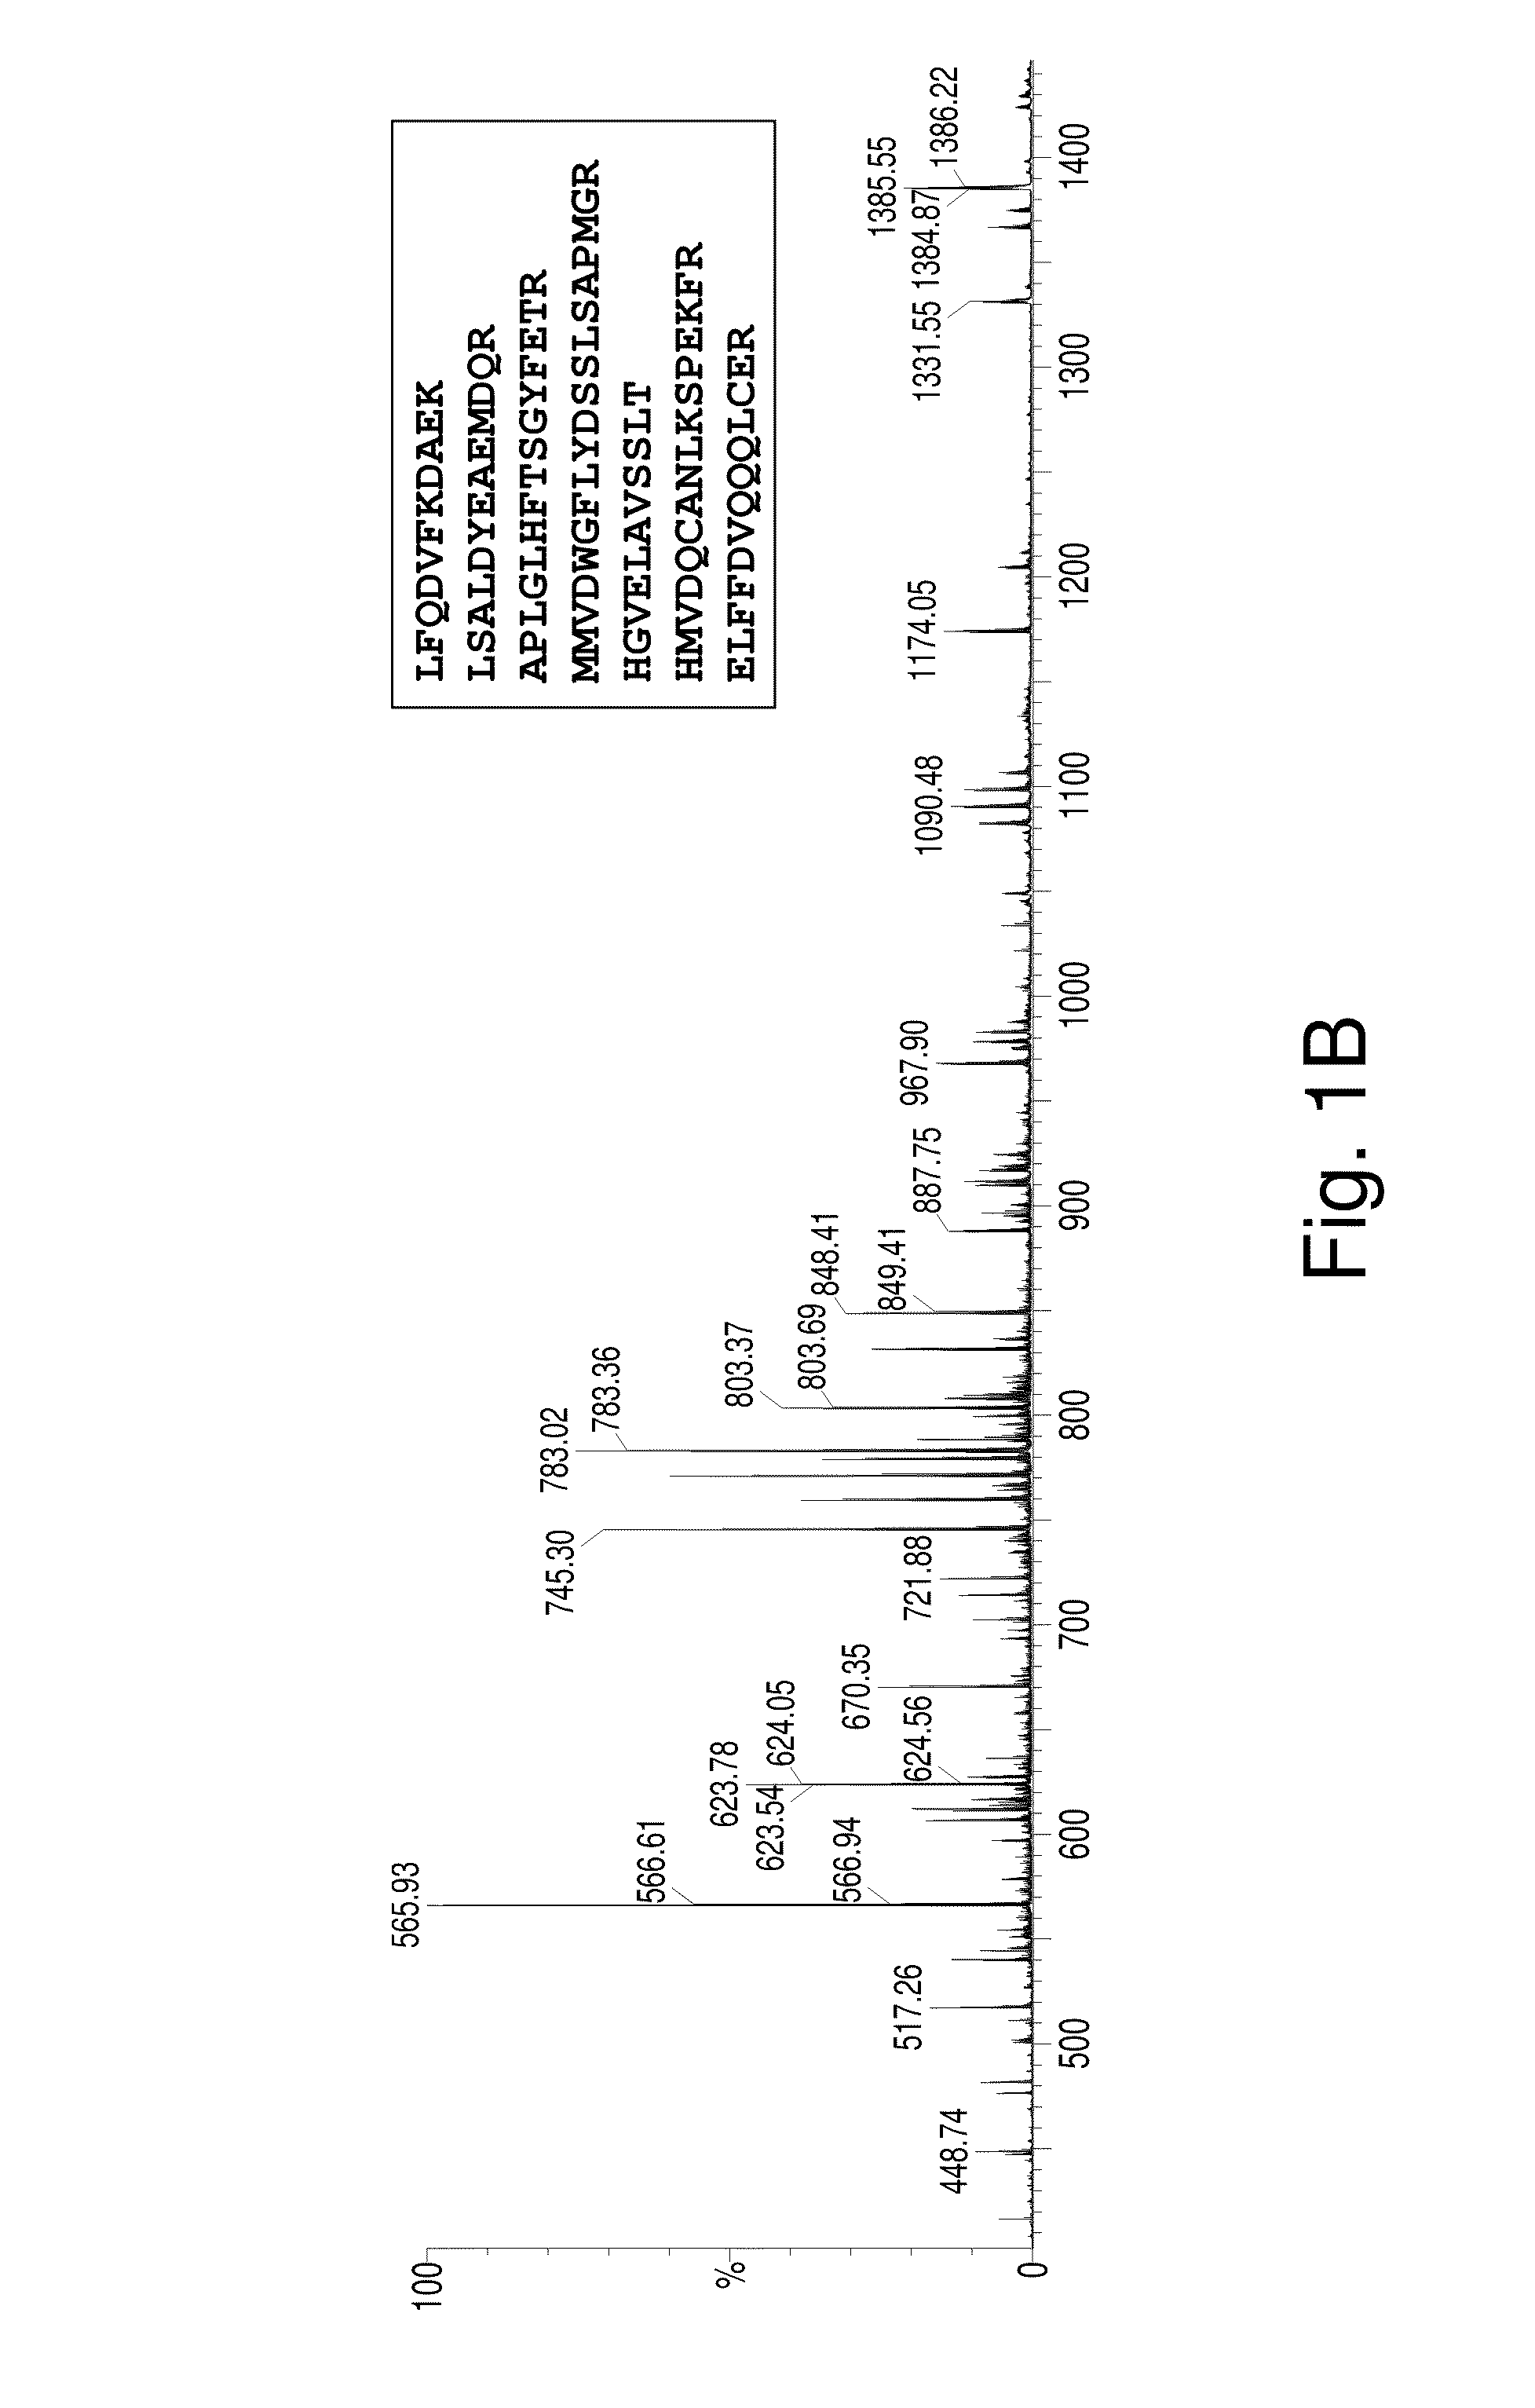 Stable amorphous calcium carbonate comprising synthetic phosphorylated peptides